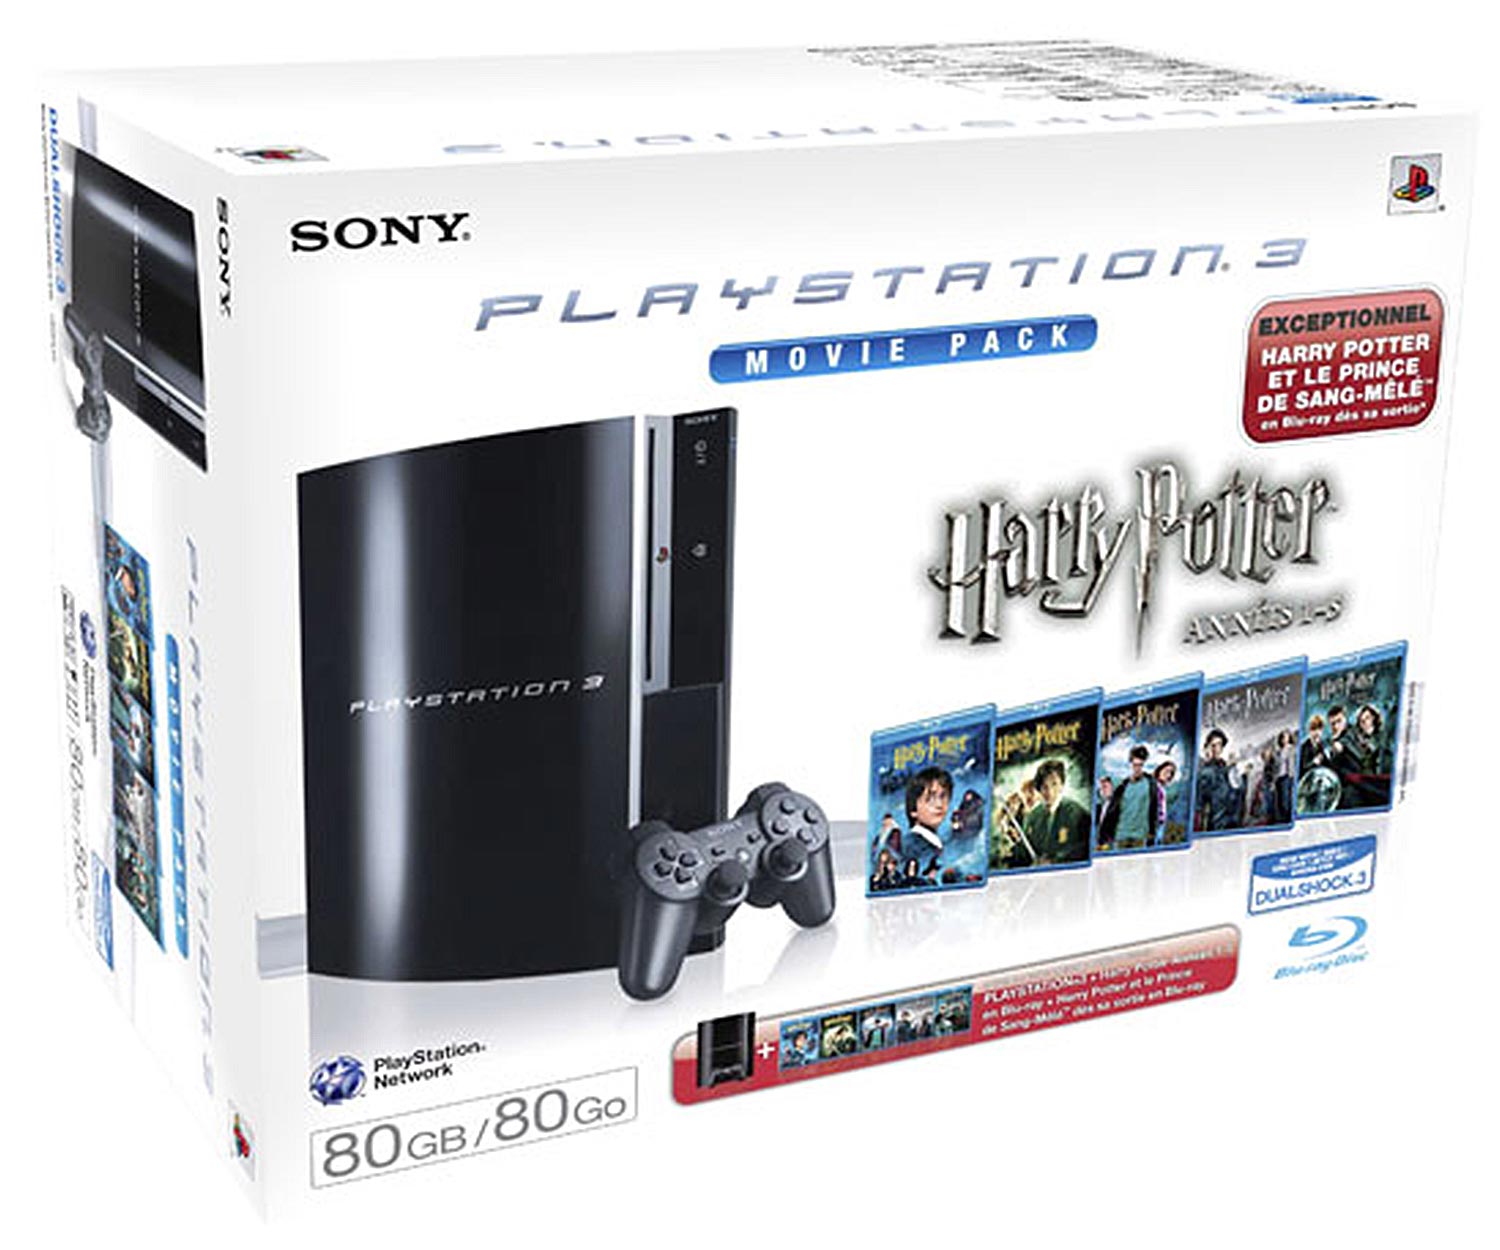 [Achat] PS3 "Movie Pack" Harry Potters (80Go)